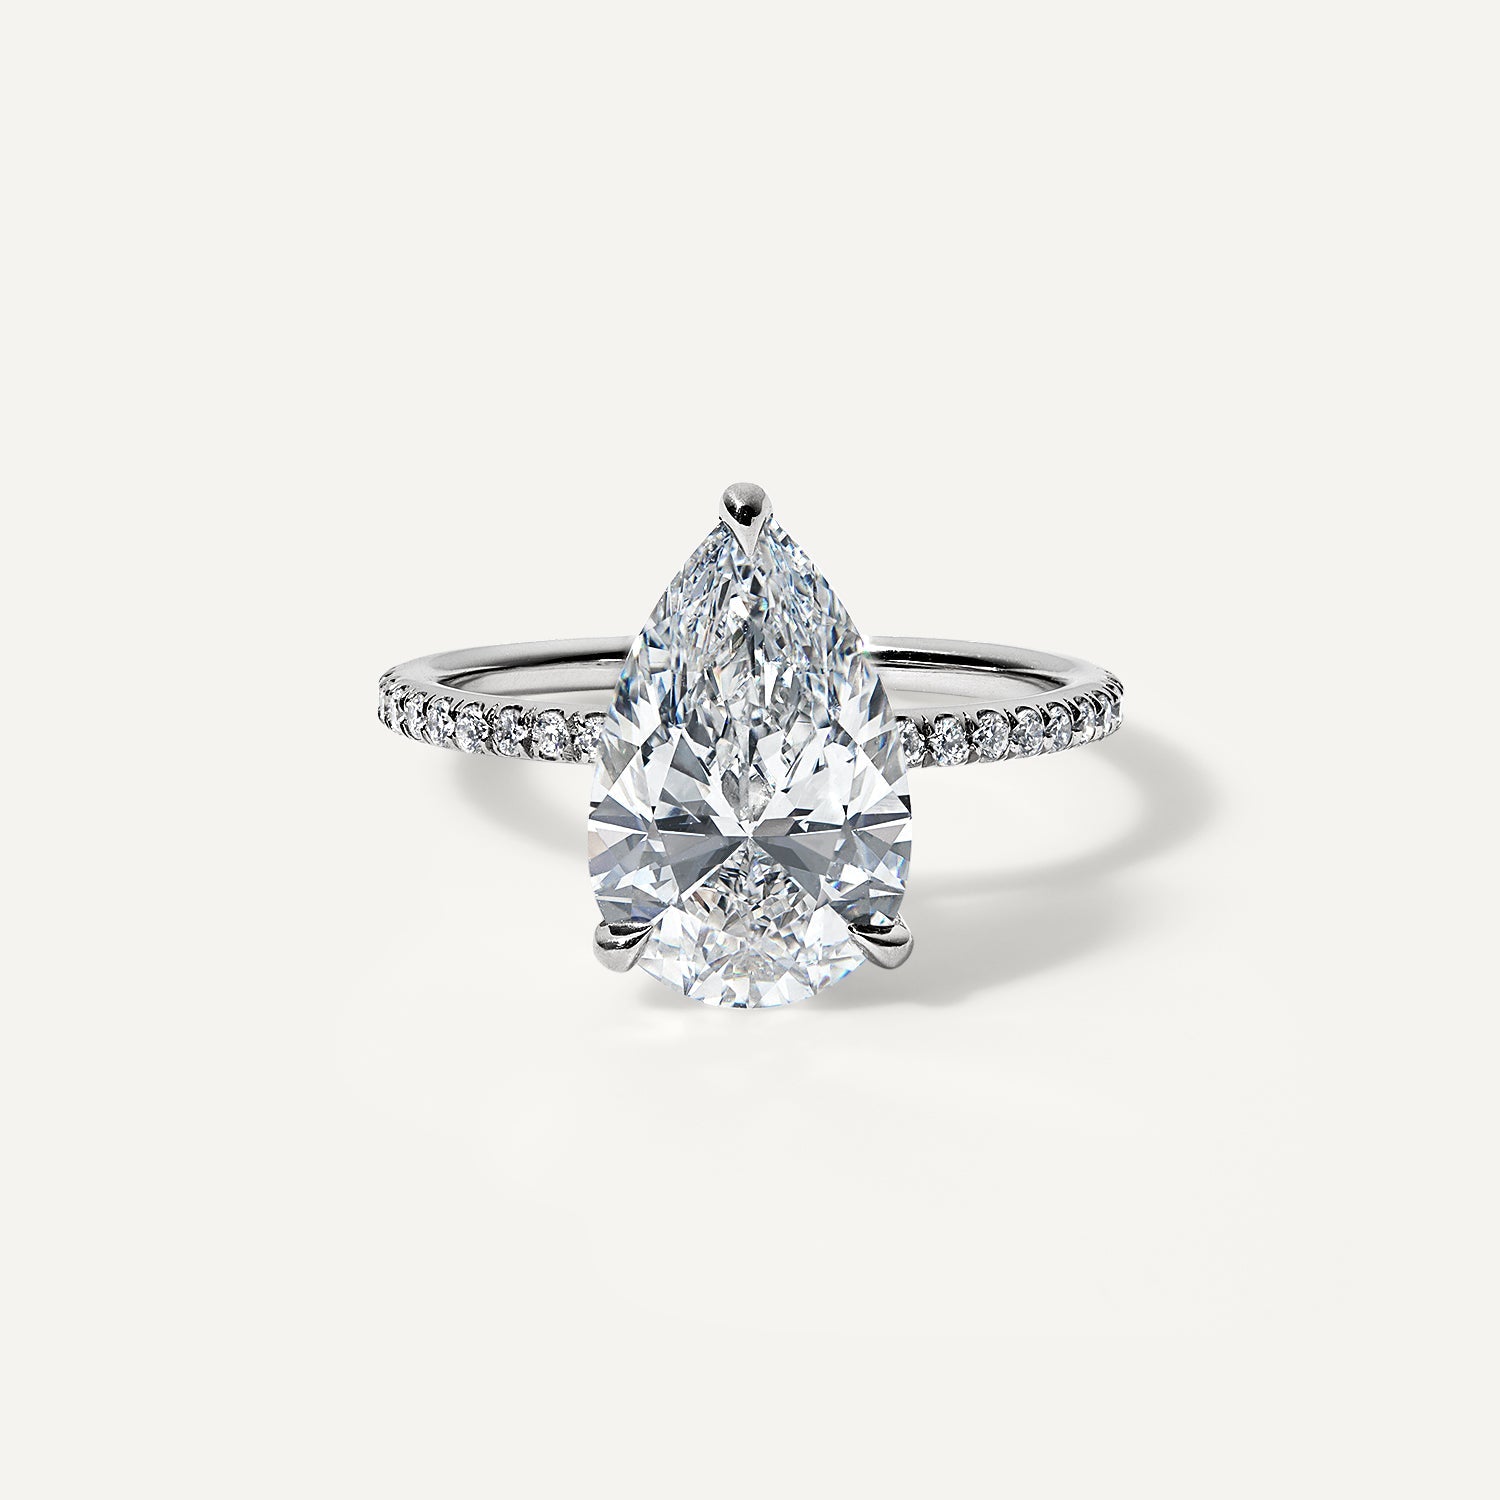 Pear lab diamond engagement ring with pave band.